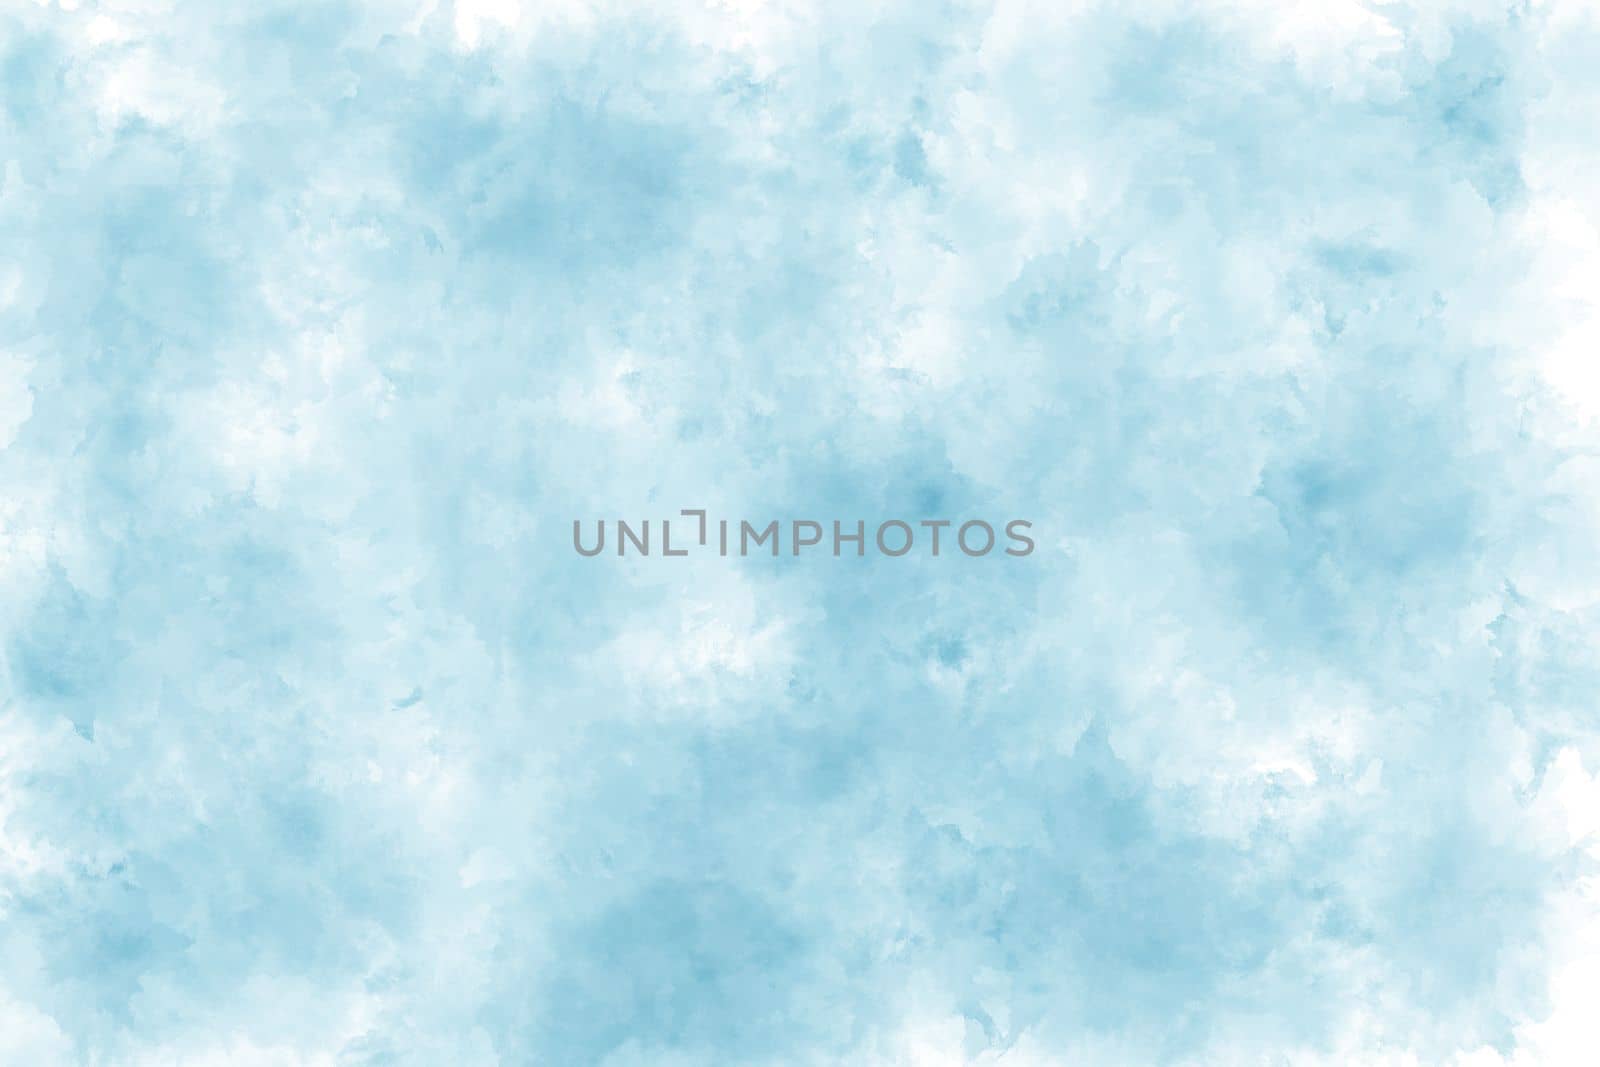 Abstract watercolor texture as background. Illustration for your graphic design, banner, poster, postcard